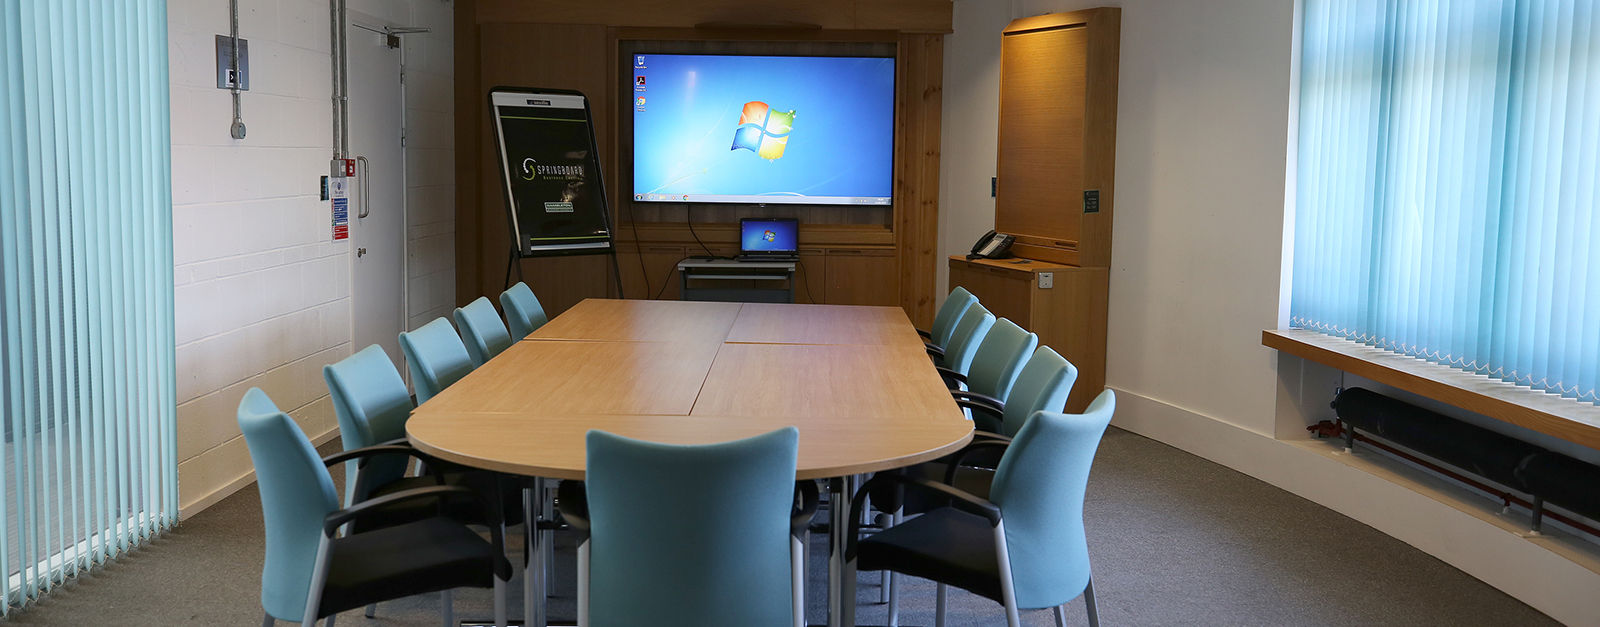 One of the conference/meeting rooms at the Springboard Business Centre